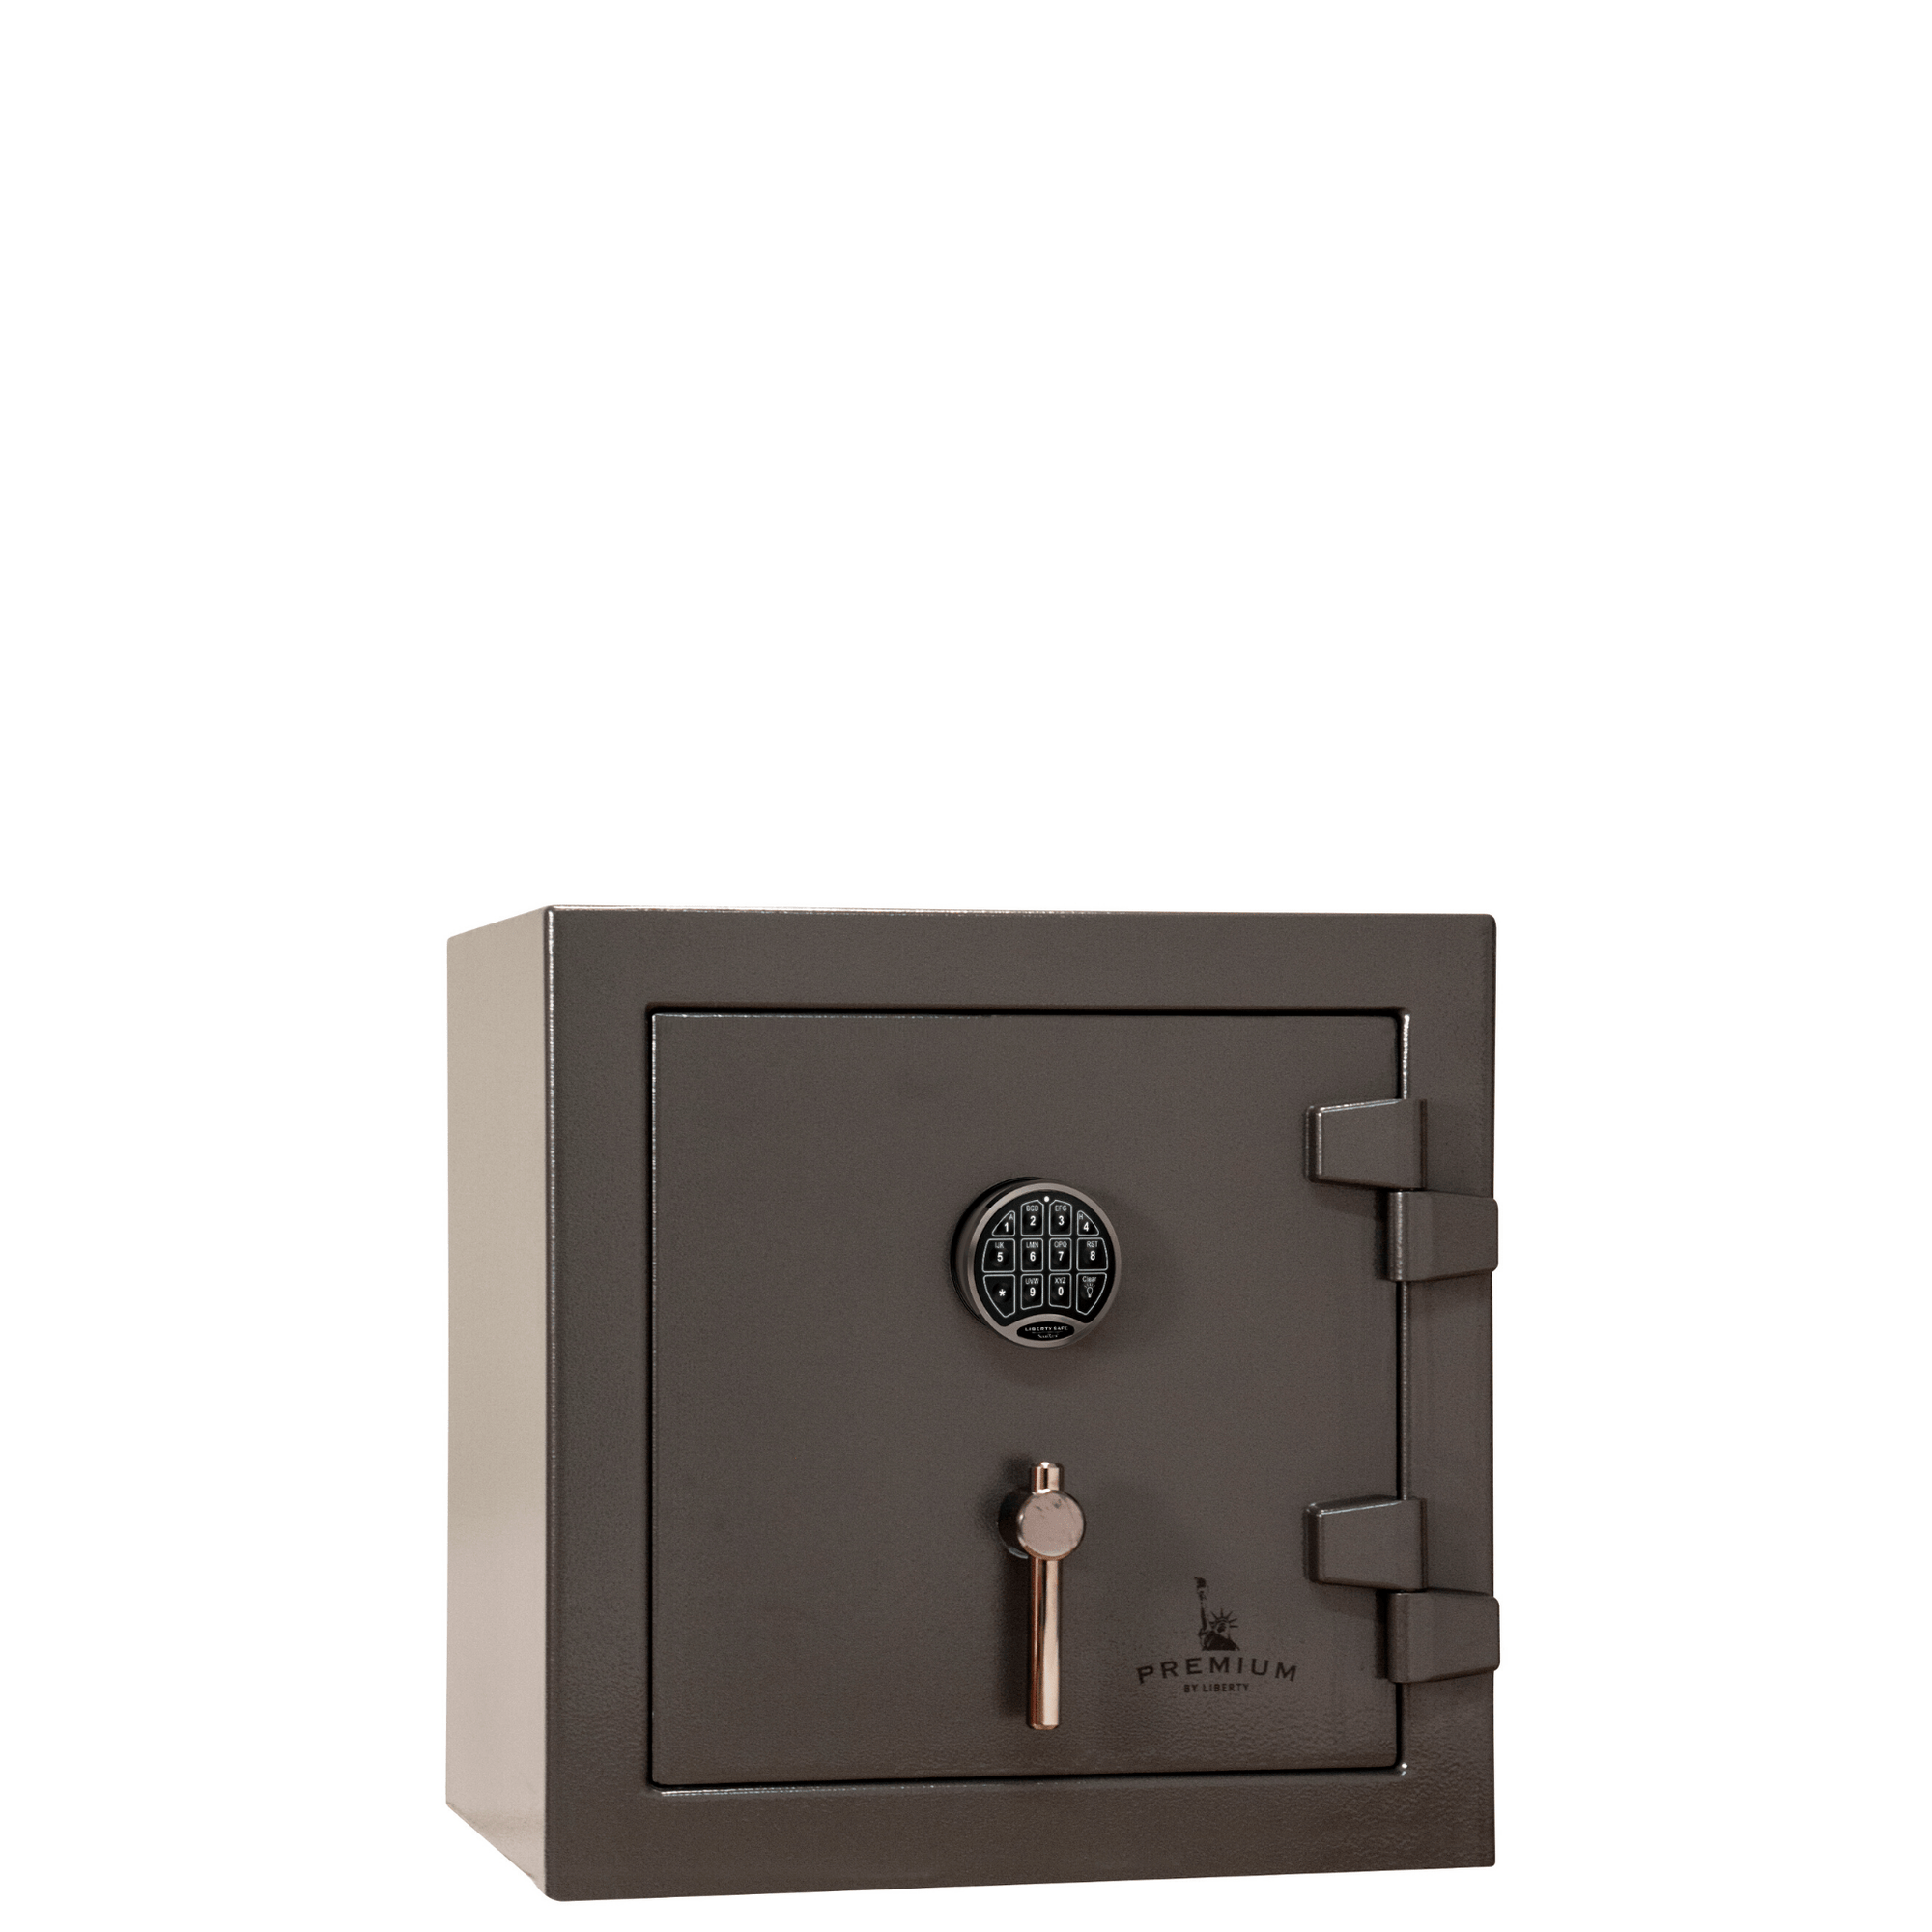 Premium Home Series | 90 Minute Fire Protection | 5 | Dimensions: 24"(H) x 24"(W) x 22.5"(D) | Gray Marble | Electronic Lock